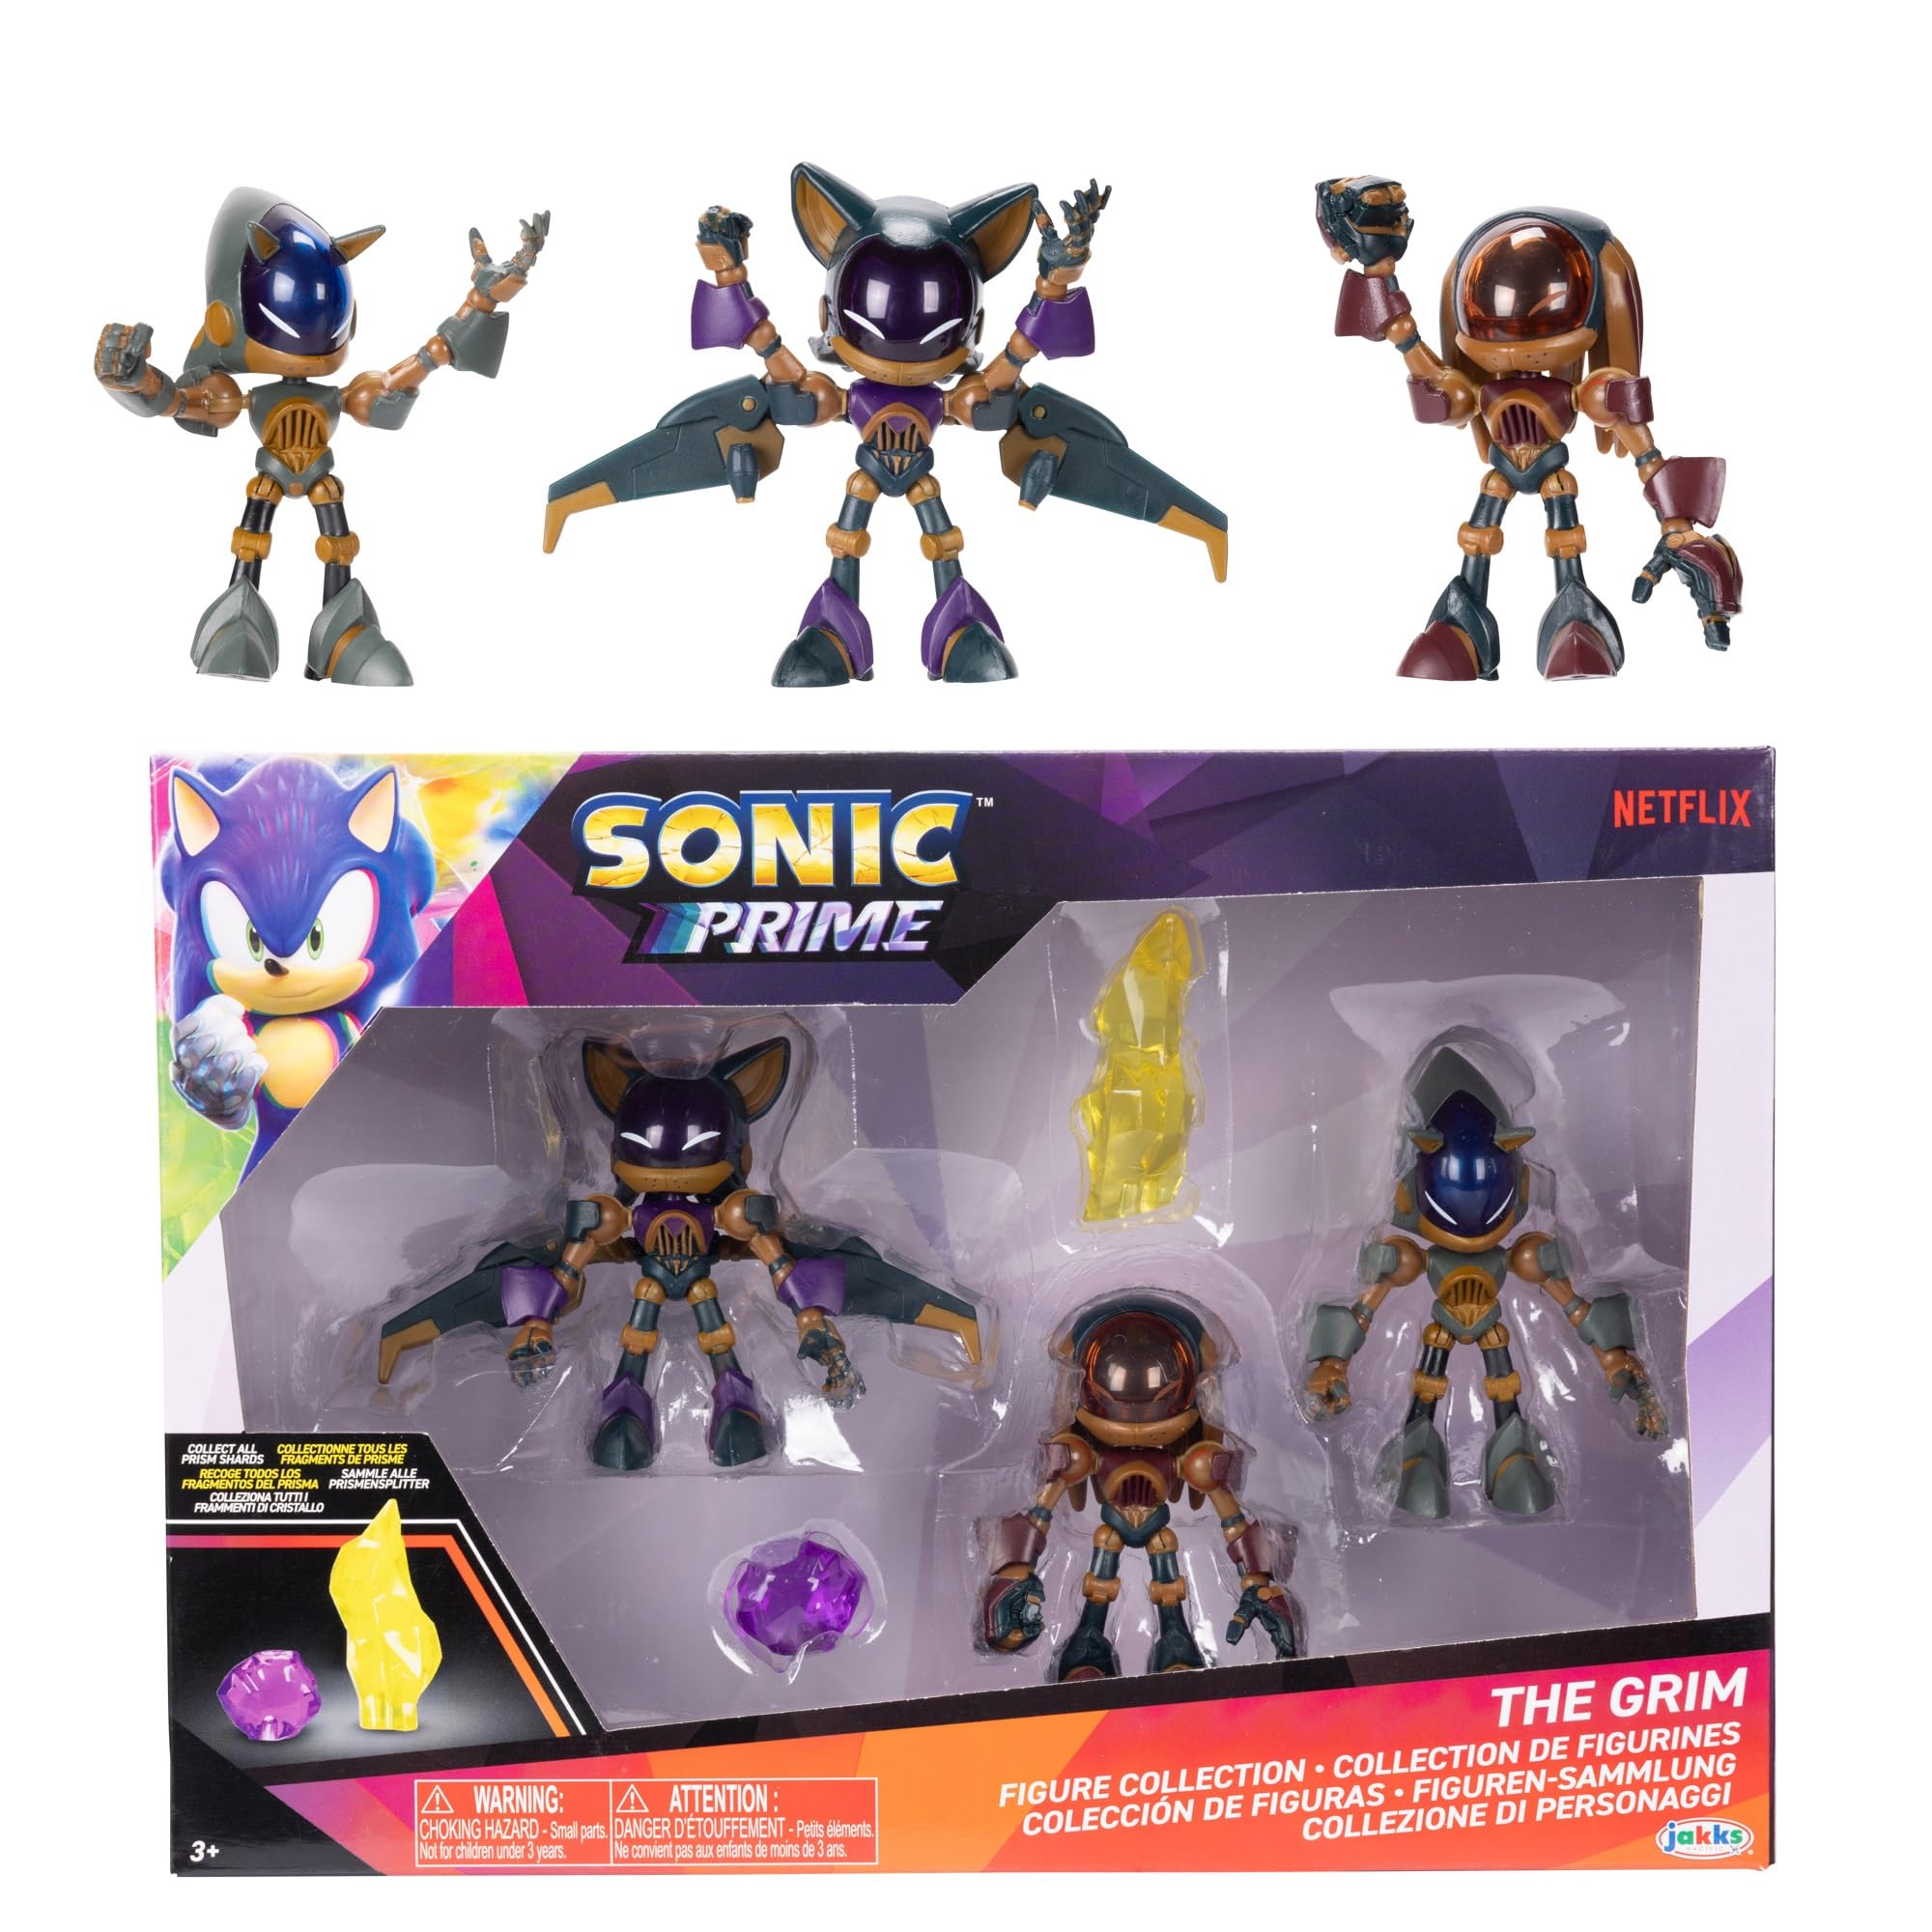 Sonic Prime 2.5-inch Action Figures The Grim Themed 5 Pieces: Sonic Trooper, Knuckles Trooper, Rouge Trooper, Yellow Shard and Purple Shard. Ages 3+ (Officially Licensed by Sega and Netflix)